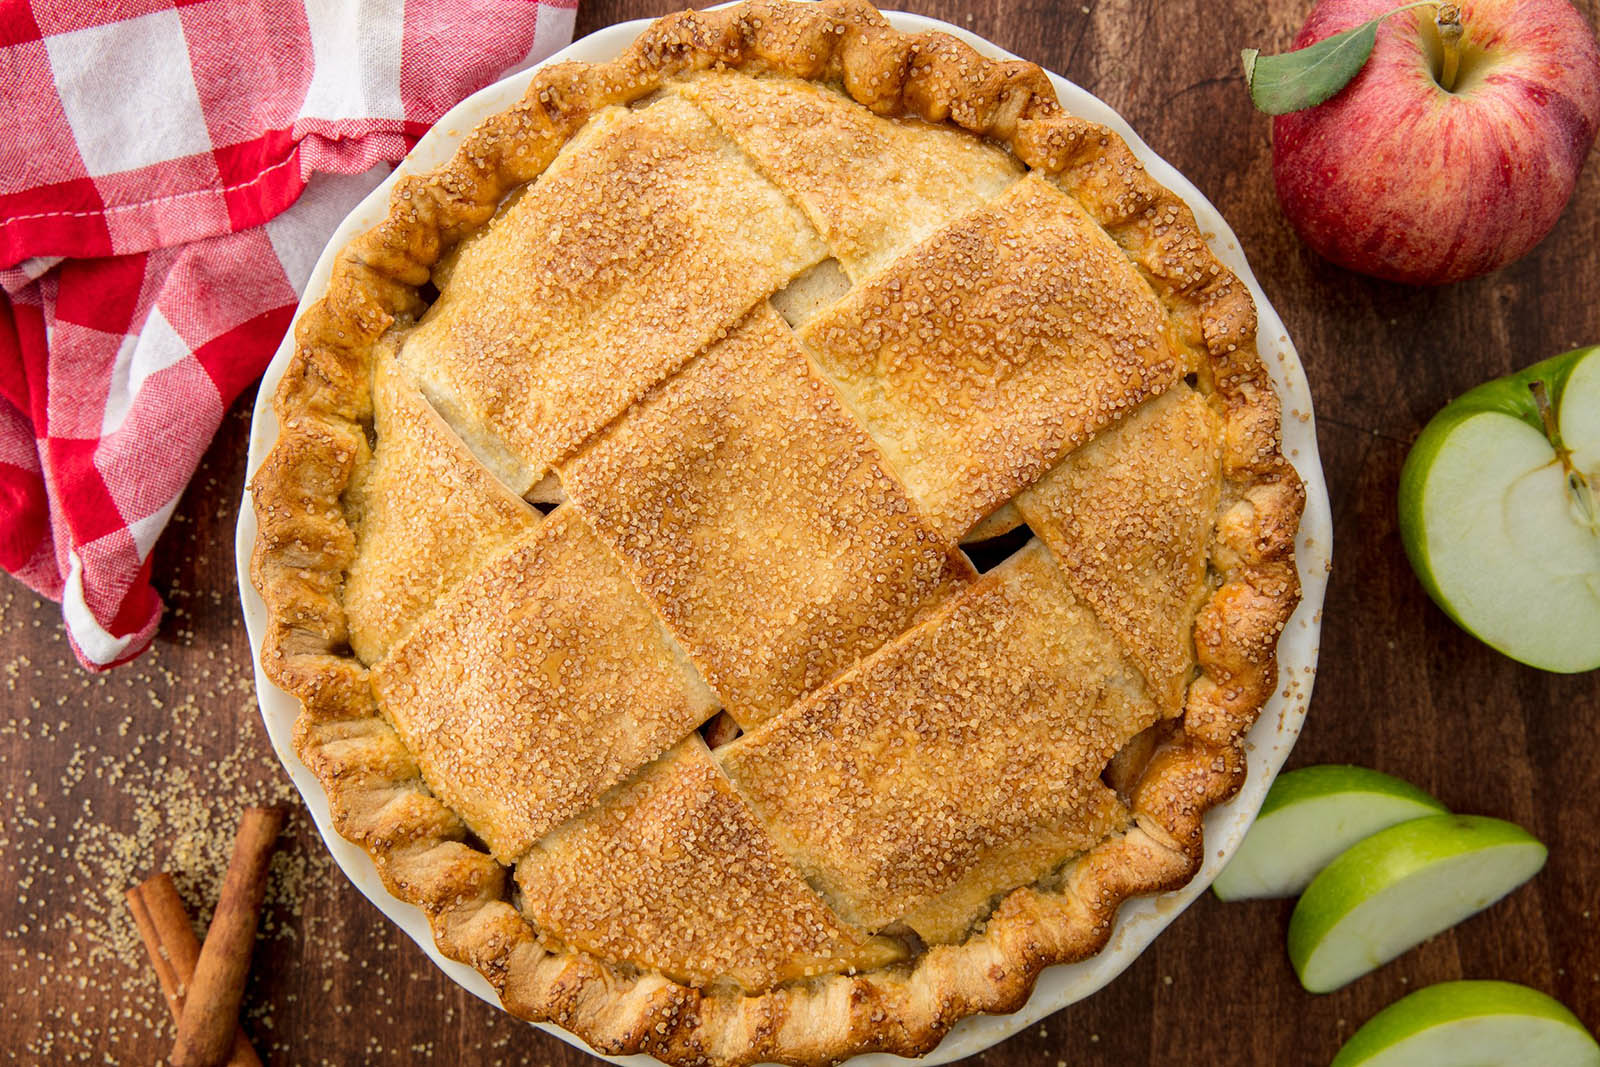 You got: Apple Pie! If You Were a Pie 🥧, Which One Would You Be? Your Cake Choices 🍰 Will Reveal Your Match